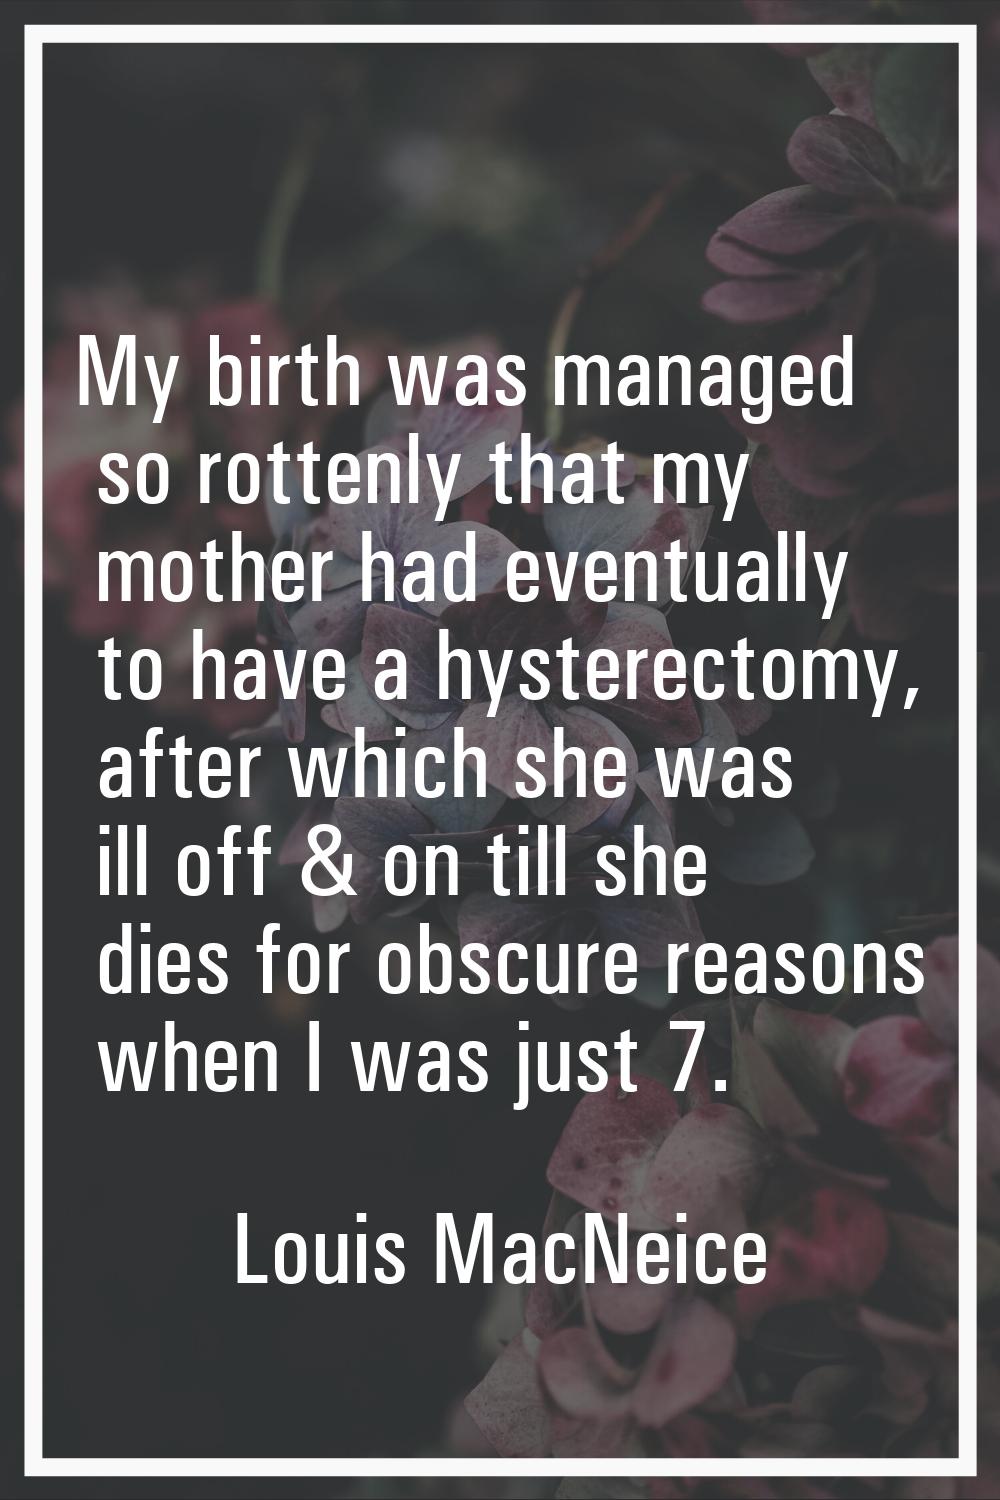 My birth was managed so rottenly that my mother had eventually to have a hysterectomy, after which 